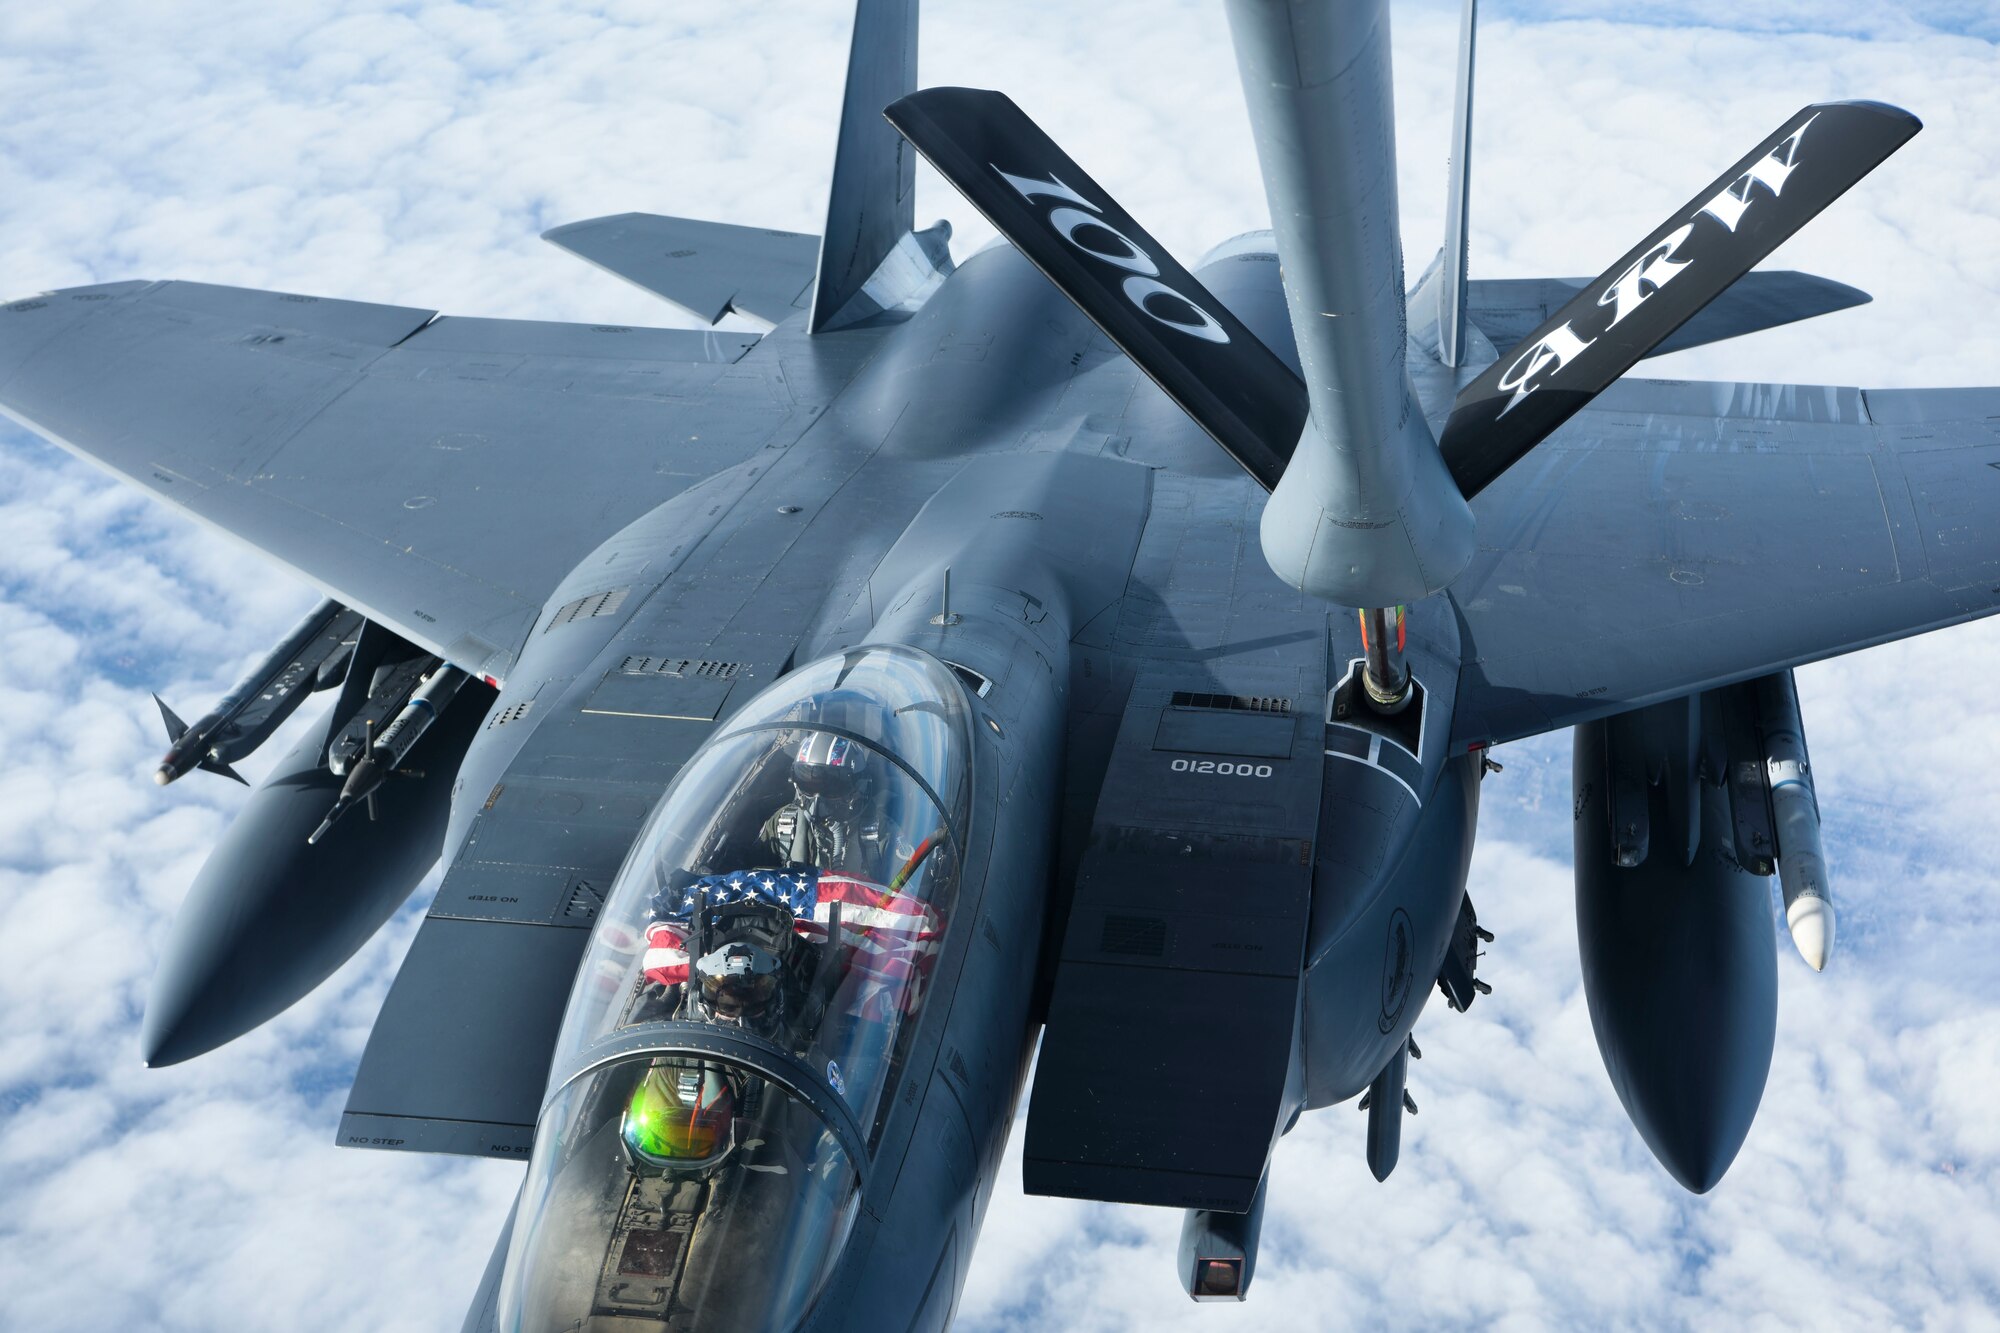 A U.S. Air Force F-15E Strike Eagle aircraft assigned to the 48th Fighter Wing, Royal Air Force Lakenheath, England, receives fuel from a KC-135 Stratotanker aircraft assigned to the 100th Air Refueling Wing from RAF Mildenhall, England, Feb. 24, 2021. The F-15E Strike Eagle is a dual-role fighter designed to perform air-to-air and air-to-ground missions. (U.S. Air Force Photo by Airman 1st Class David C Busby)